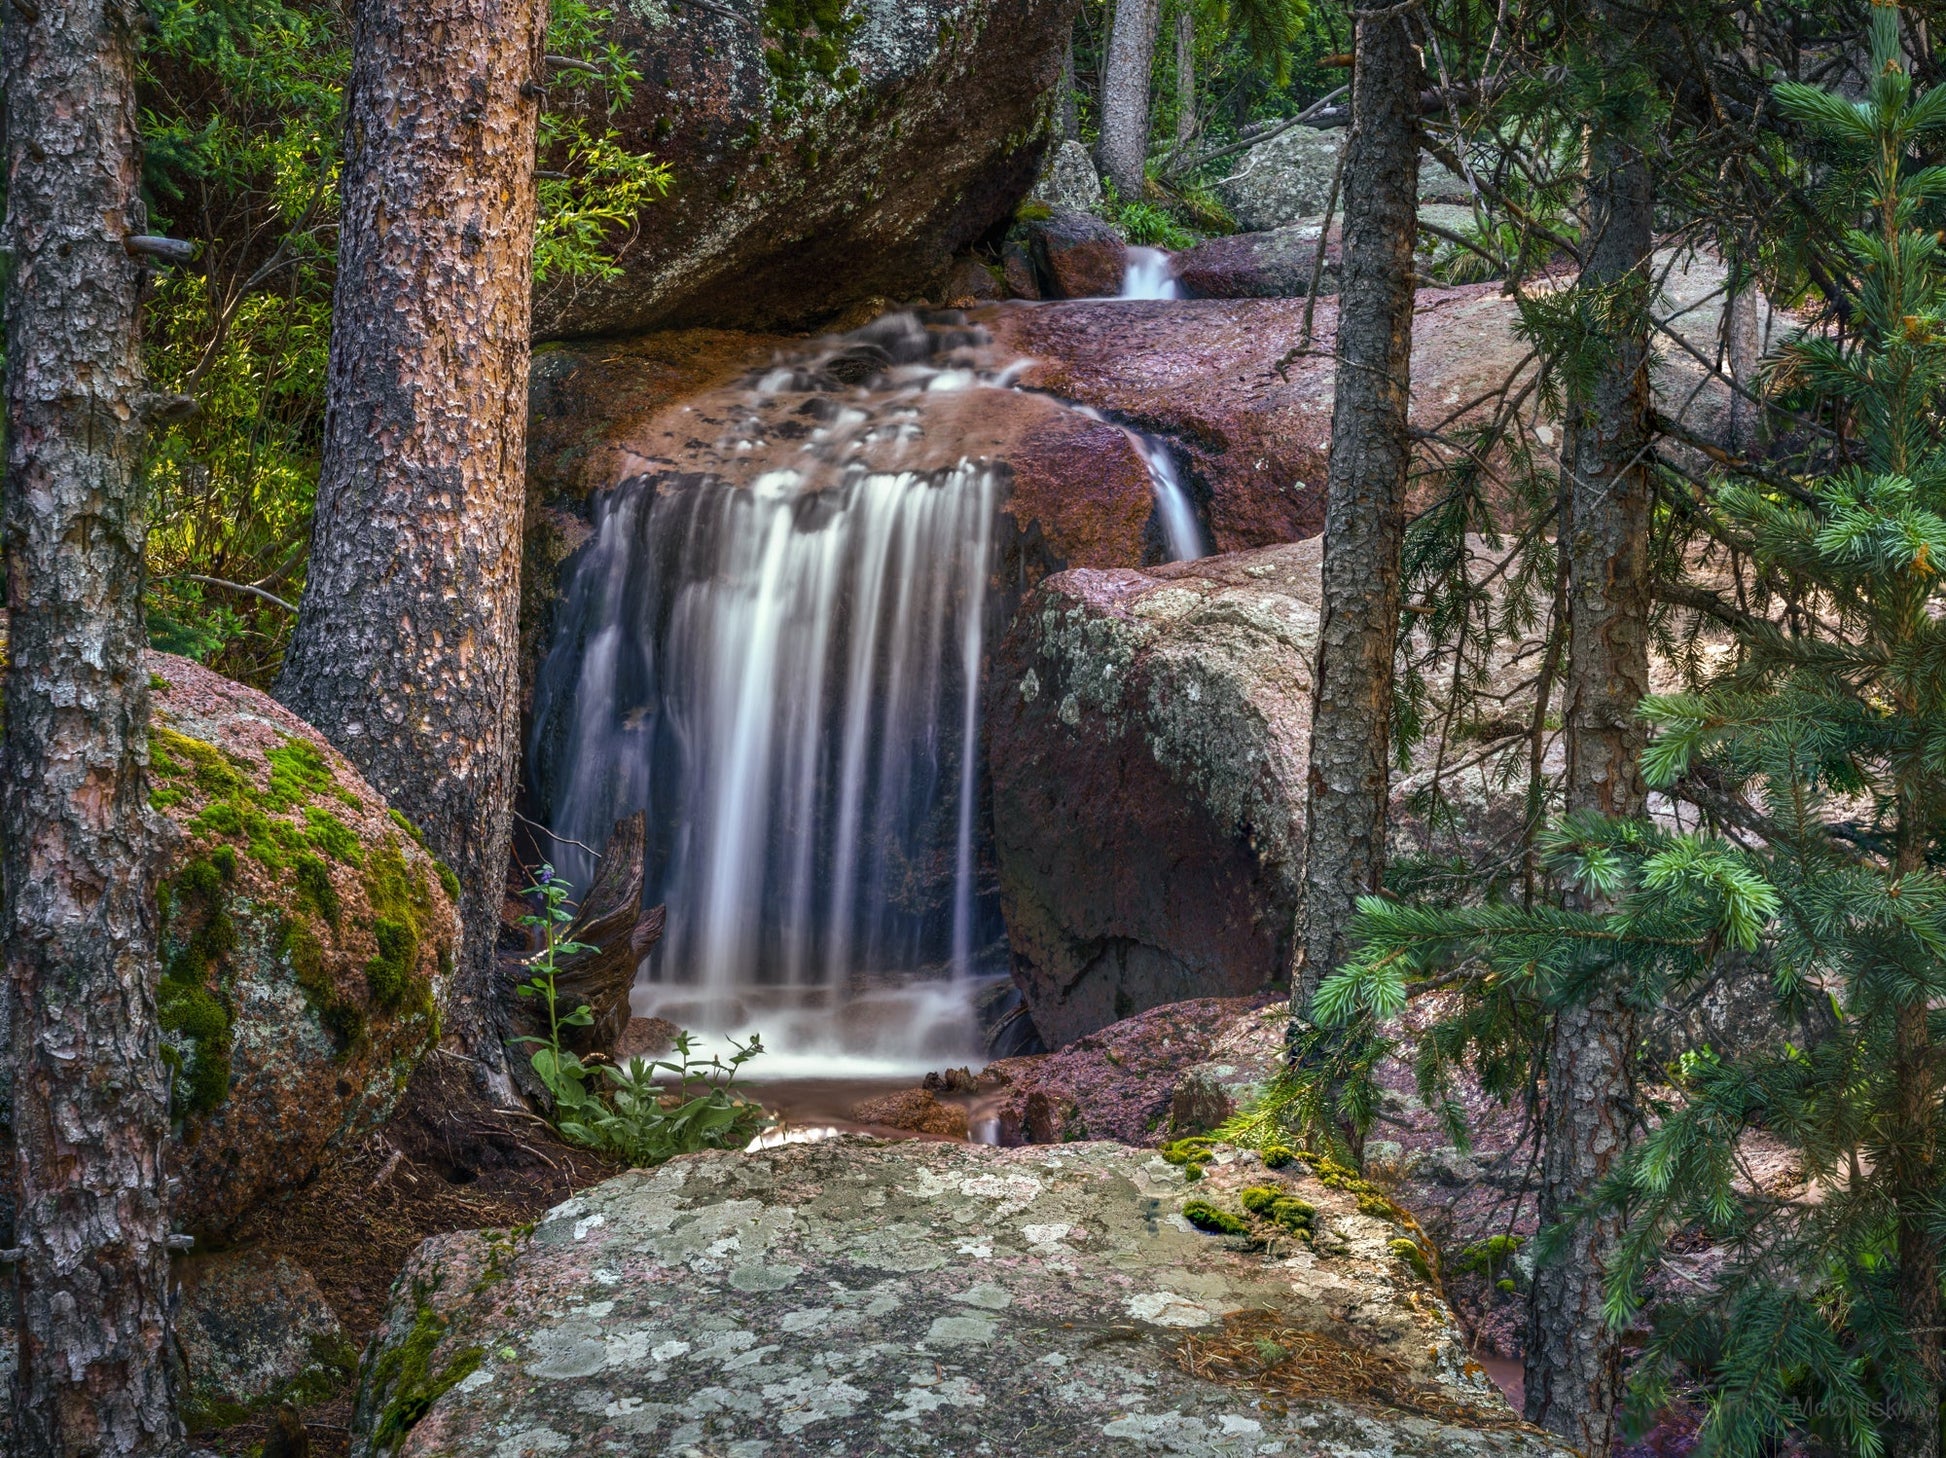 Horsethief fall peaking between the trees and granite boulders. I loved the light on the scene, and the simple lines of the water mirrored by the tree trunks; a beautiful fine art nature image!